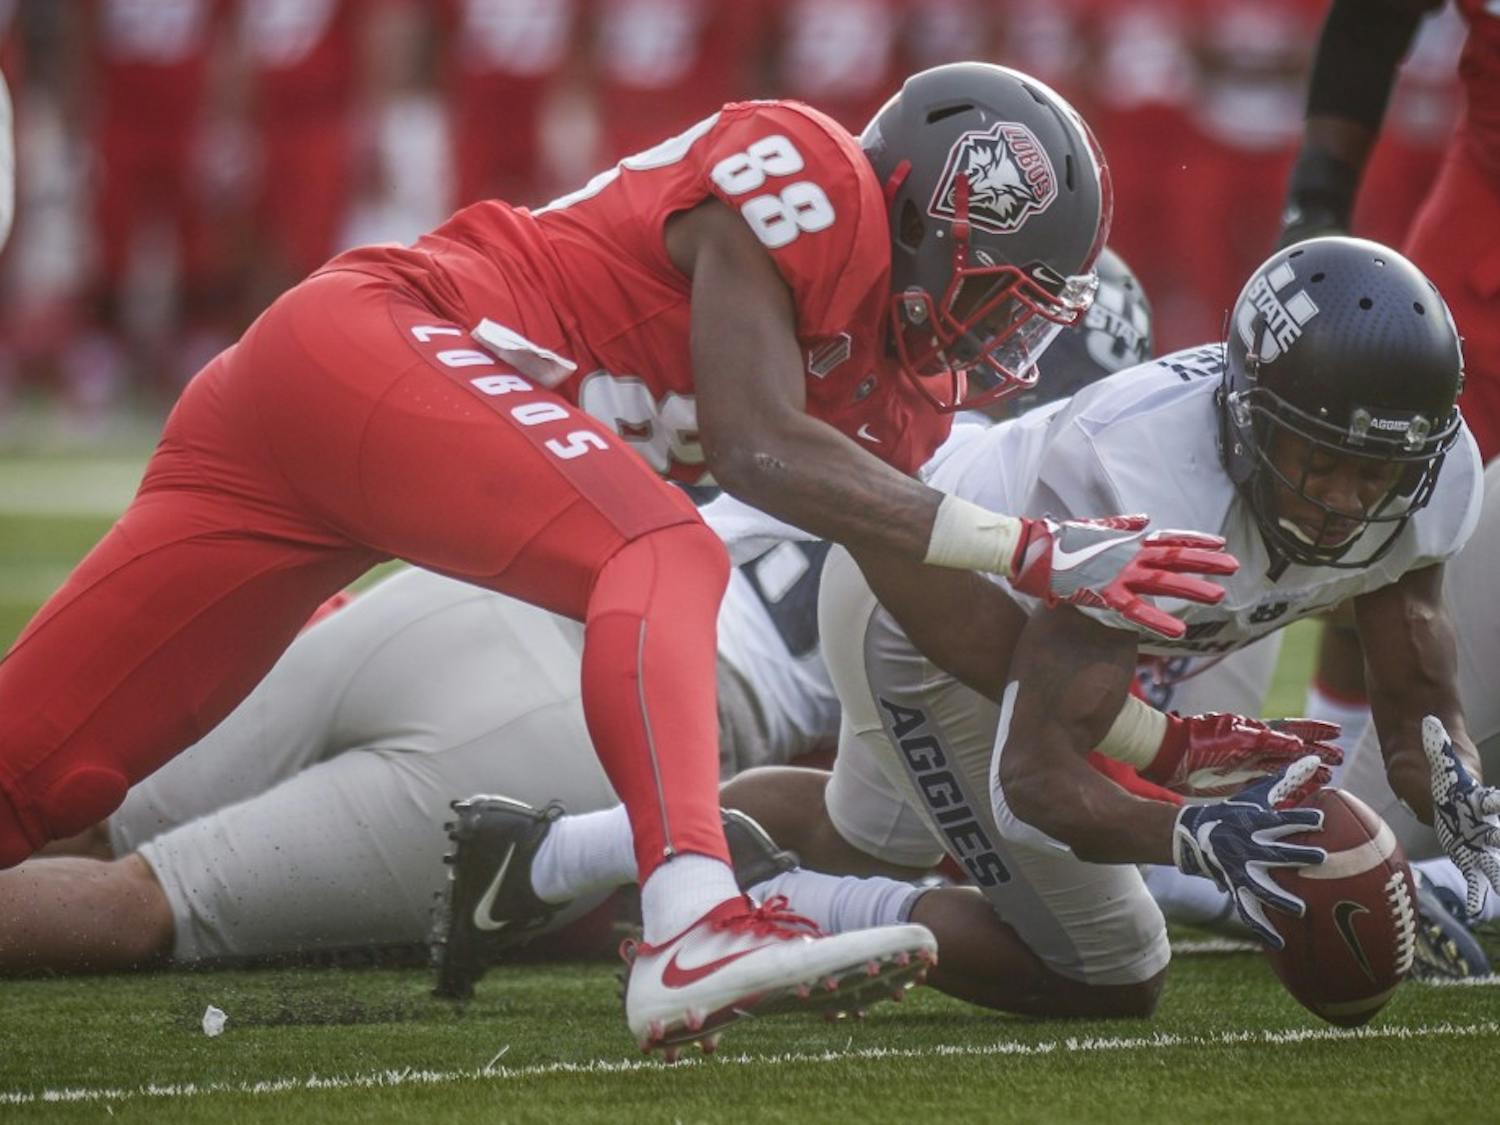 Lobo tight end Marcus Williams and Aggie Cornerback Cameron Haney contest a loose ball after  Lobo quarterback Lamar Jordan&nbsp; fumbled in the 1st quarter, November 6, 2017. The Lobos were defeated by Utah State 24-10 at Dreamstyle Stadium.